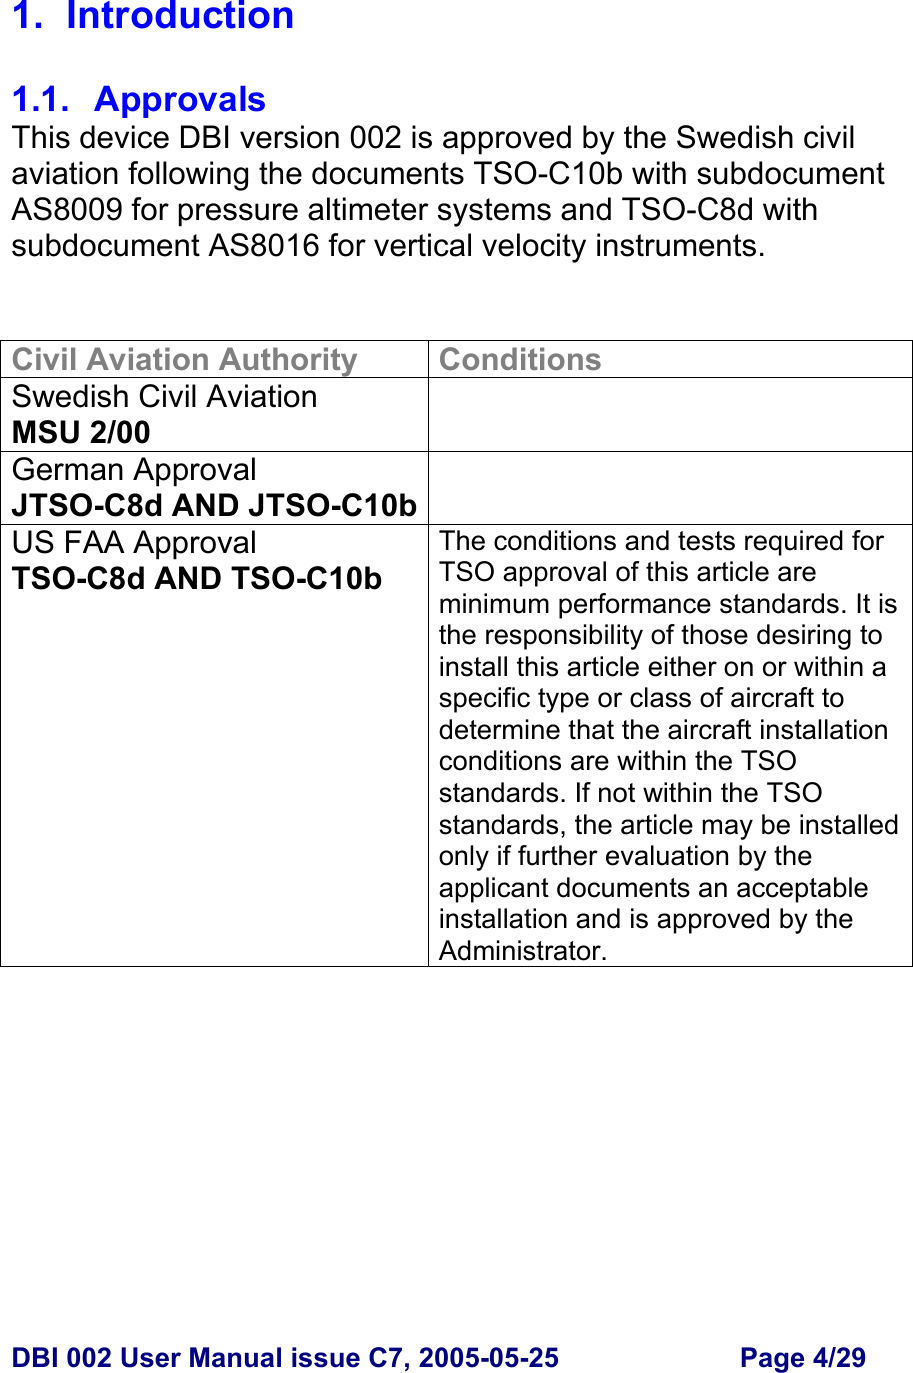  DBI 002 User Manual issue C7, 2005-05-25  Page 4/29  1. Introduction  1.1. Approvals This device DBI version 002 is approved by the Swedish civil aviation following the documents TSO-C10b with subdocument AS8009 for pressure altimeter systems and TSO-C8d with subdocument AS8016 for vertical velocity instruments.   Civil Aviation Authority  Conditions Swedish Civil Aviation MSU 2/00  German Approval JTSO-C8d AND JTSO-C10b US FAA Approval TSO-C8d AND TSO-C10b The conditions and tests required for TSO approval of this article are minimum performance standards. It is the responsibility of those desiring to install this article either on or within a specific type or class of aircraft to determine that the aircraft installation conditions are within the TSO standards. If not within the TSO standards, the article may be installed only if further evaluation by the applicant documents an acceptable installation and is approved by the Administrator.      